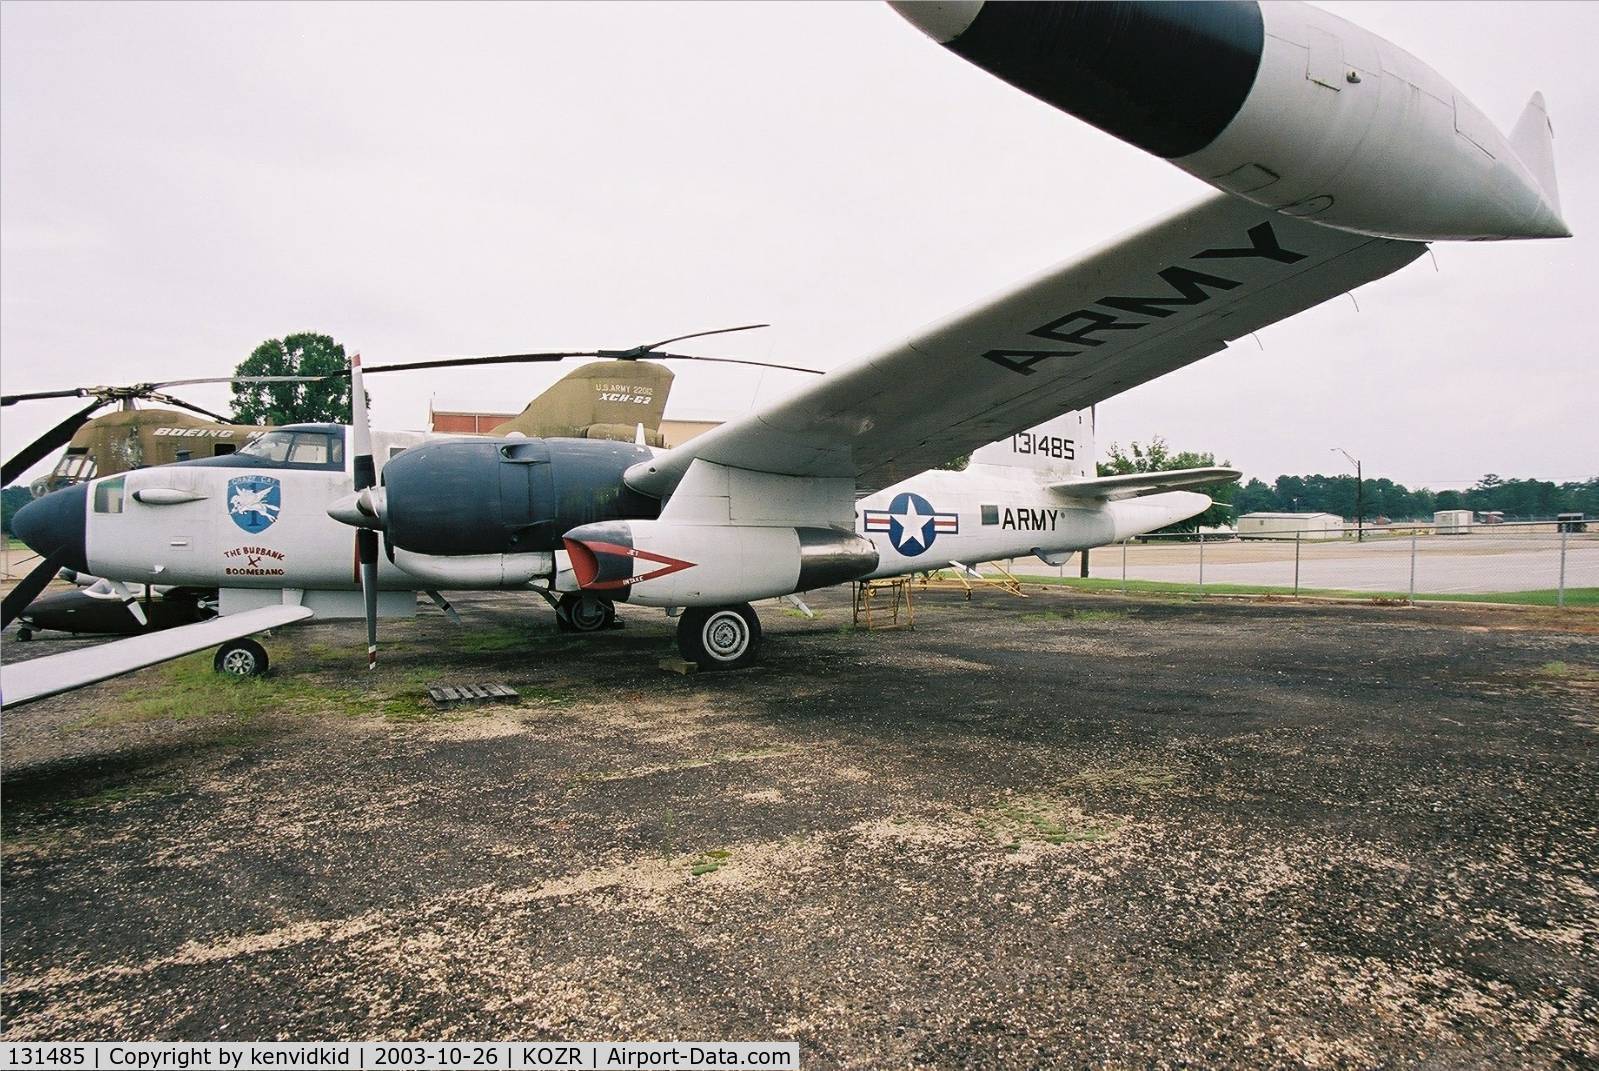 131485, Lockheed AP-2E Neptune C/N 426-5366, At the Fort Rucker Museum storage compound.